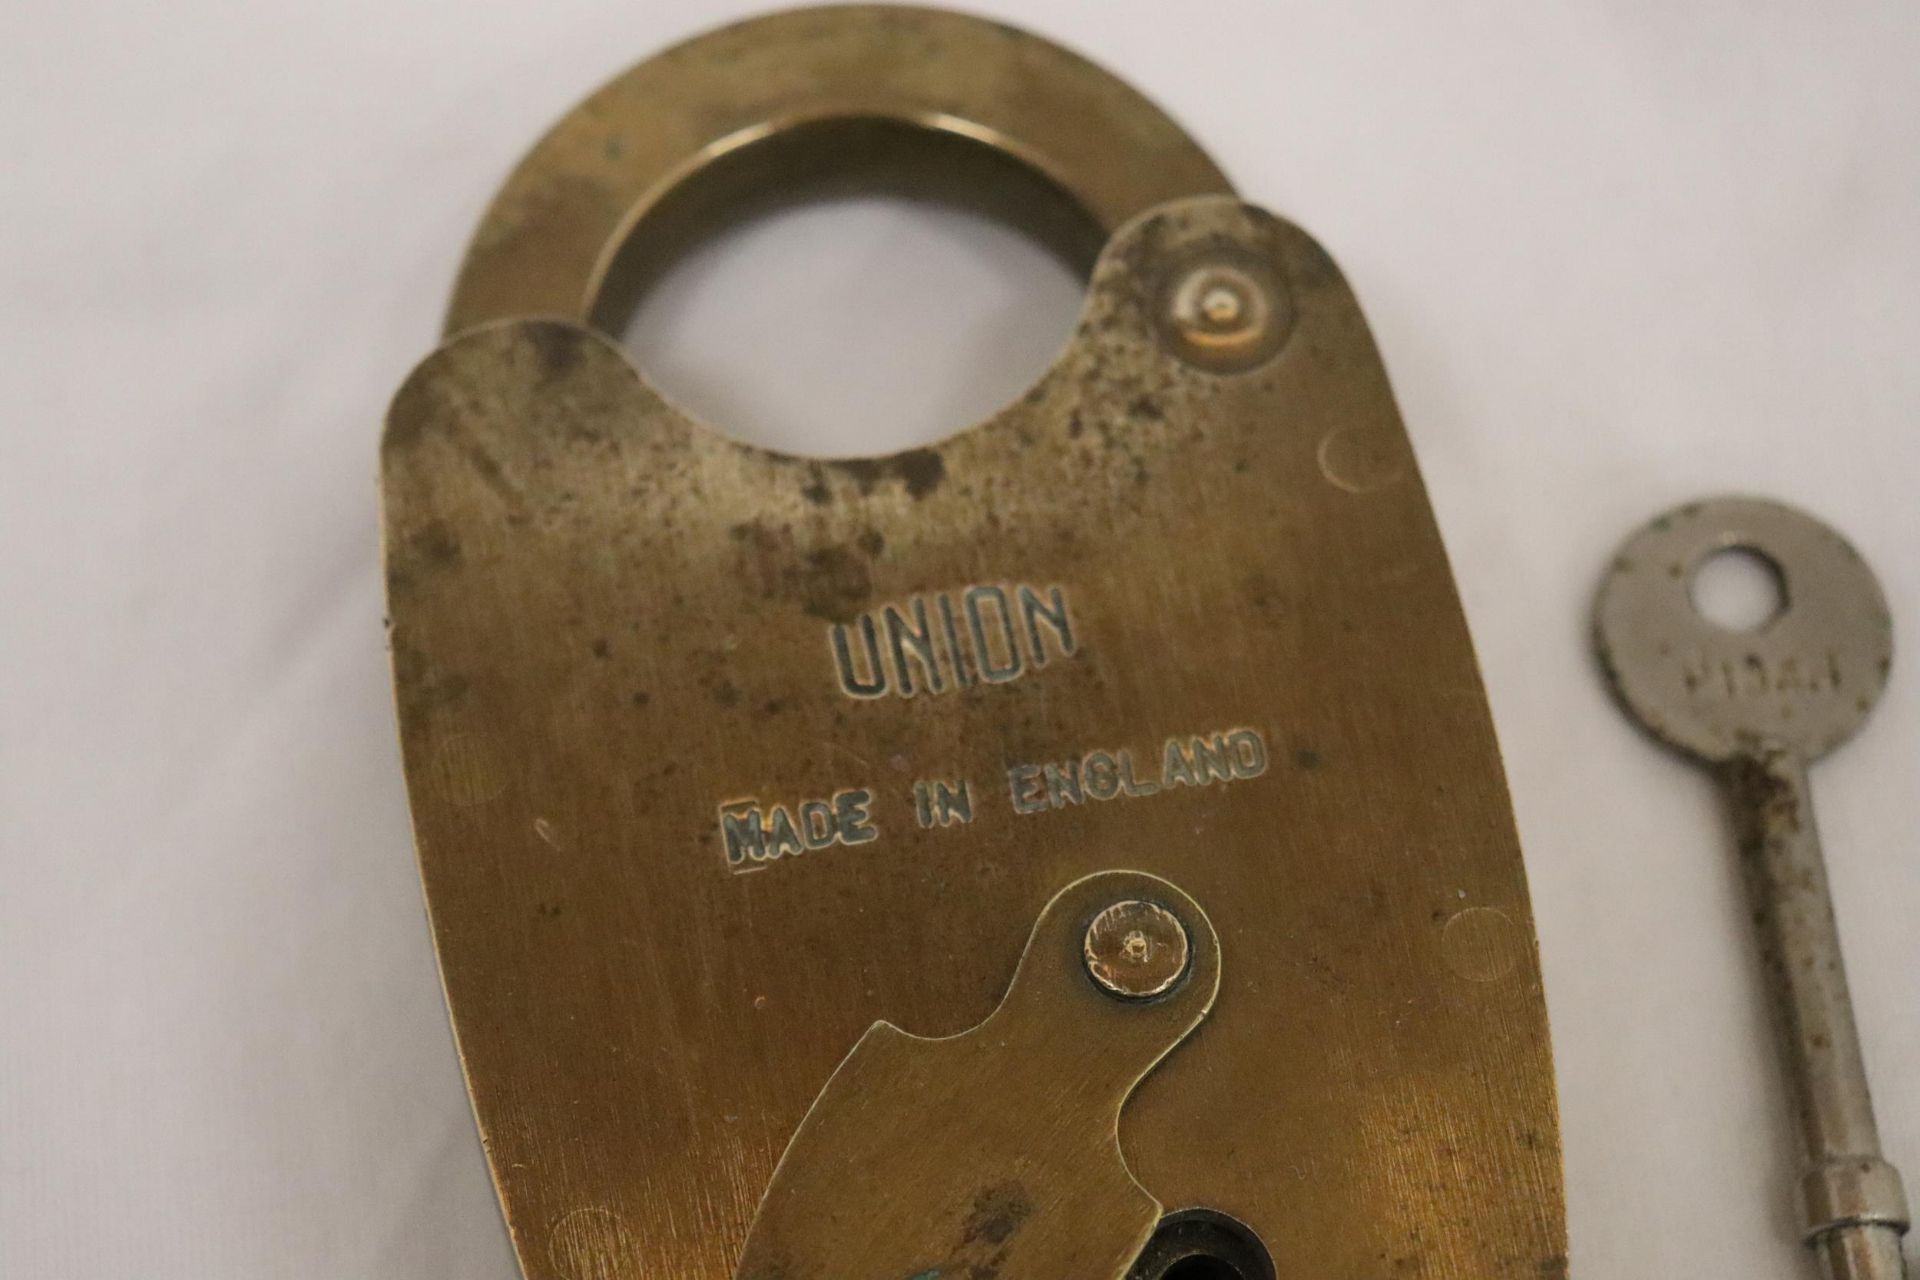 A VINTAGE BRASS UNION PADDLOCK AND KEY - 5 INCH TALL - Image 4 of 5